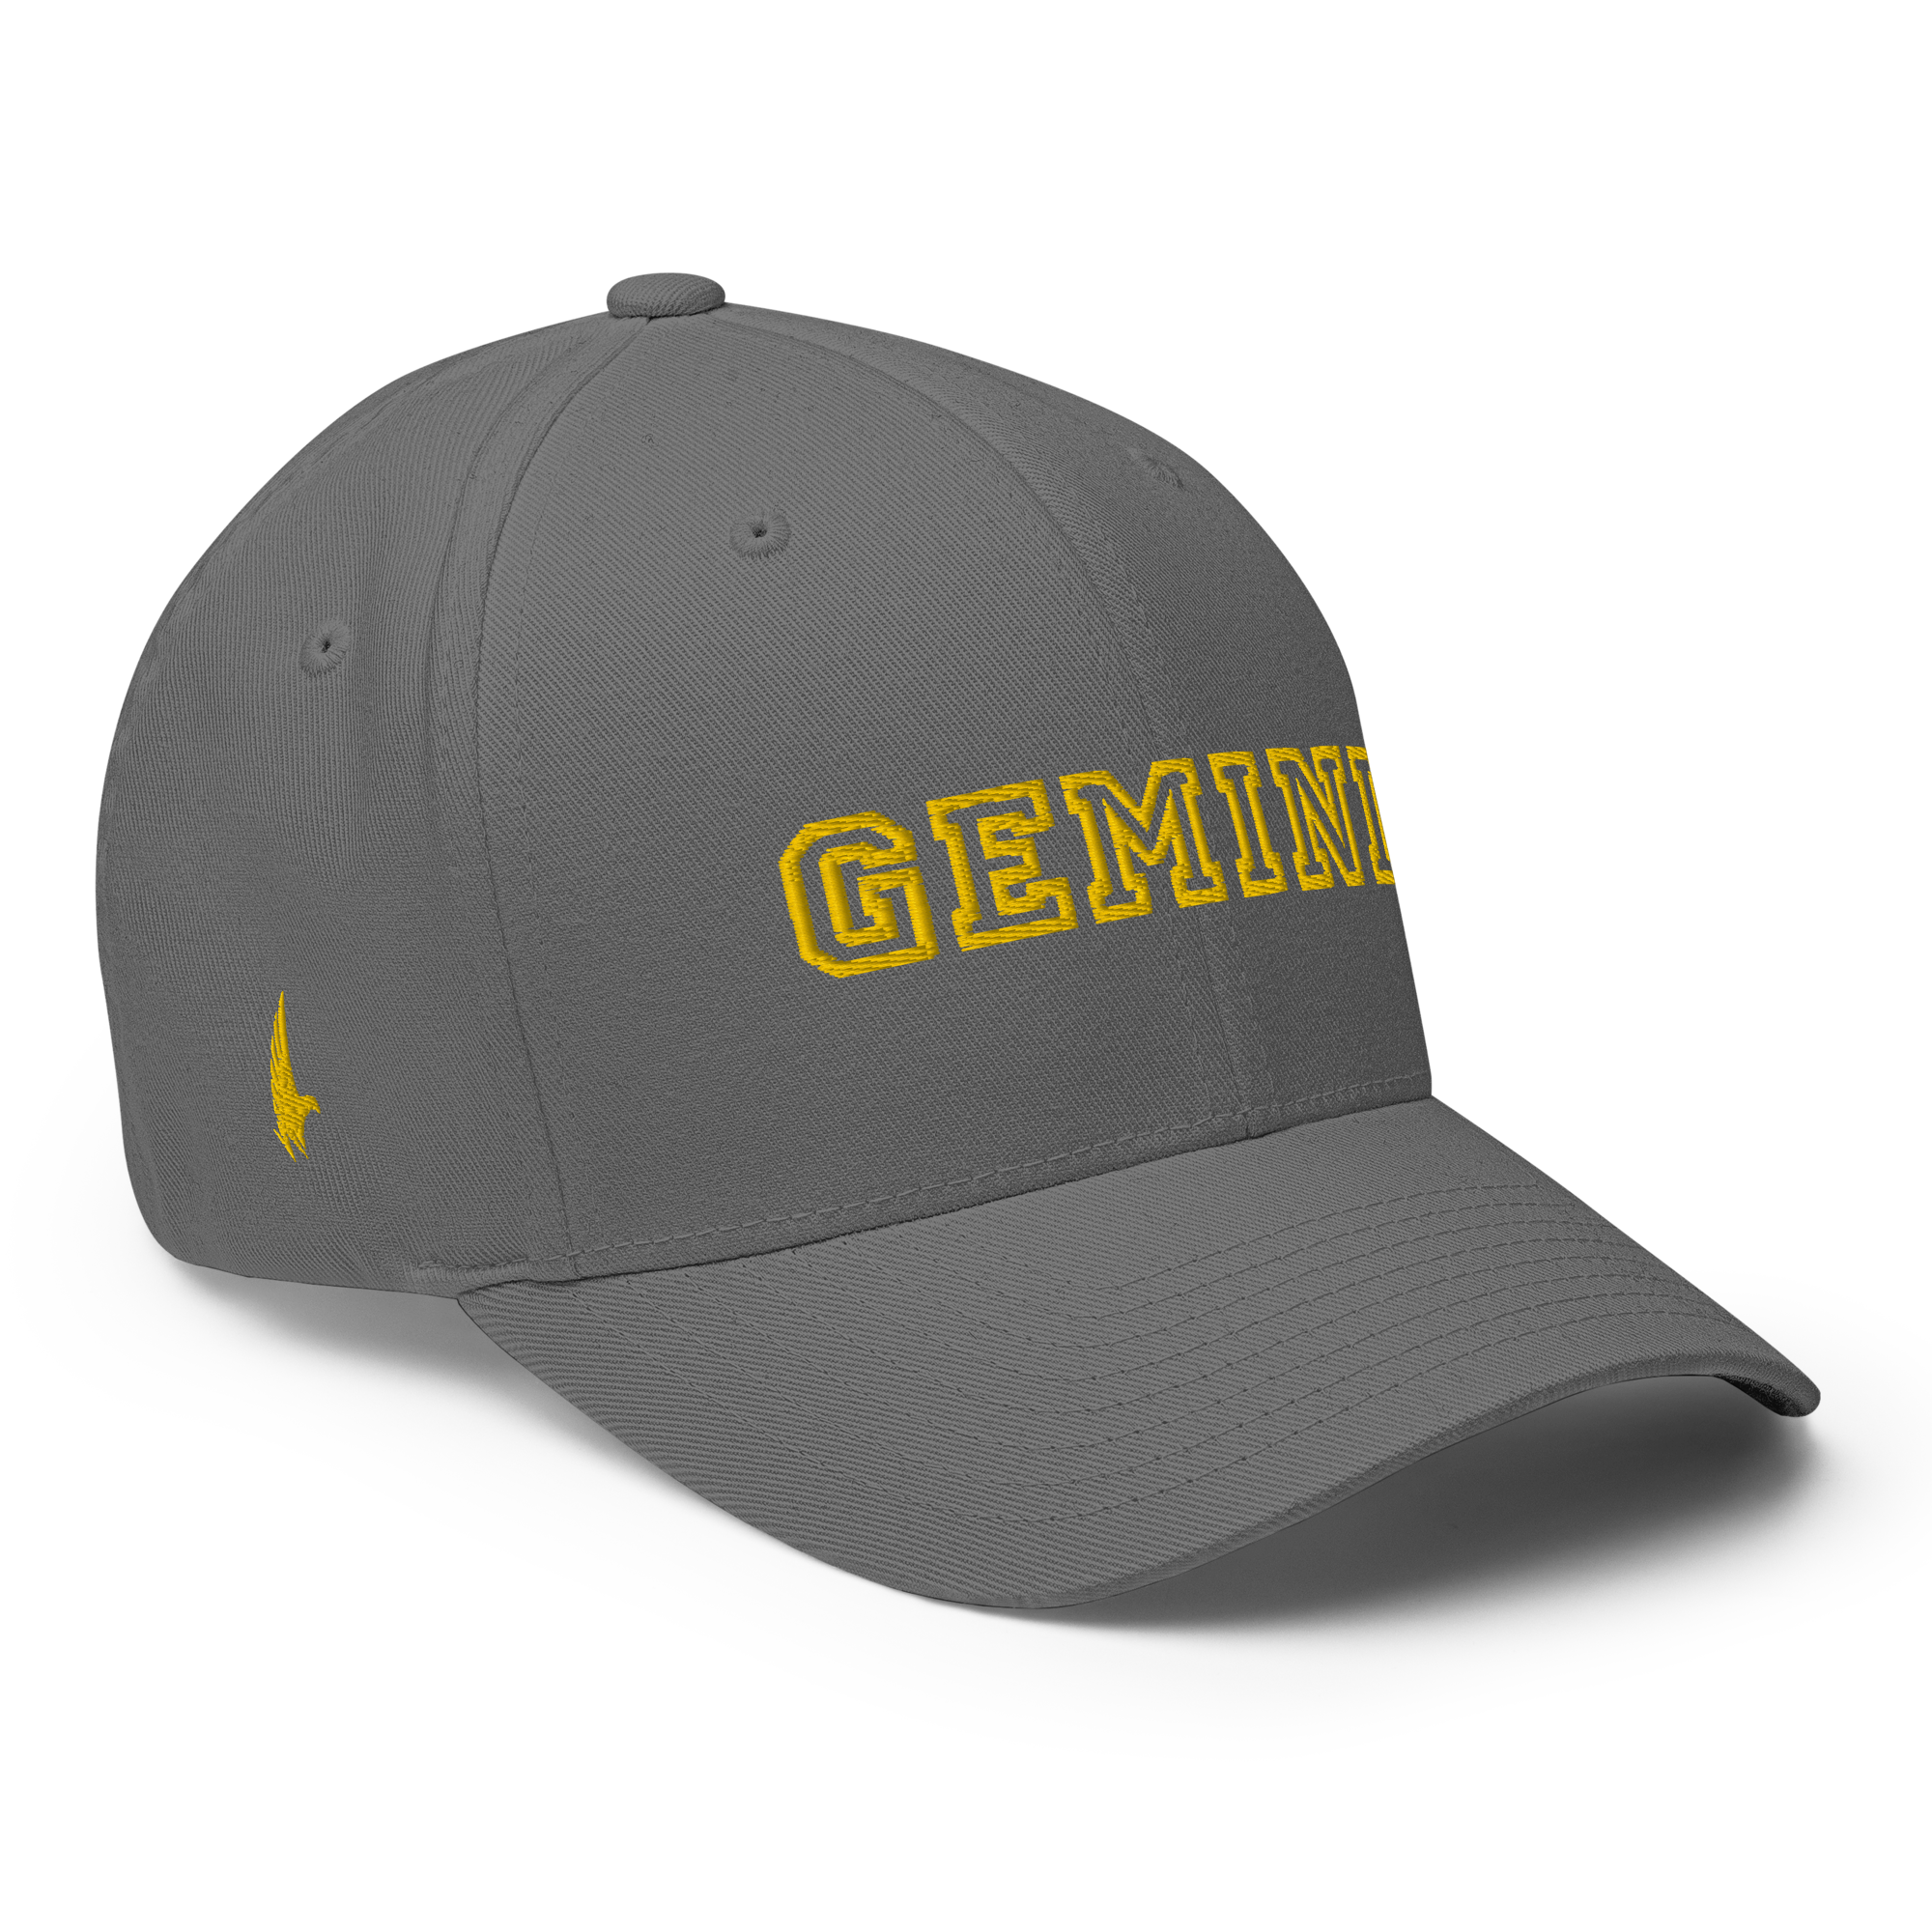 Gemini Legacy Fitted Hat Grey - Loyalty Vibes